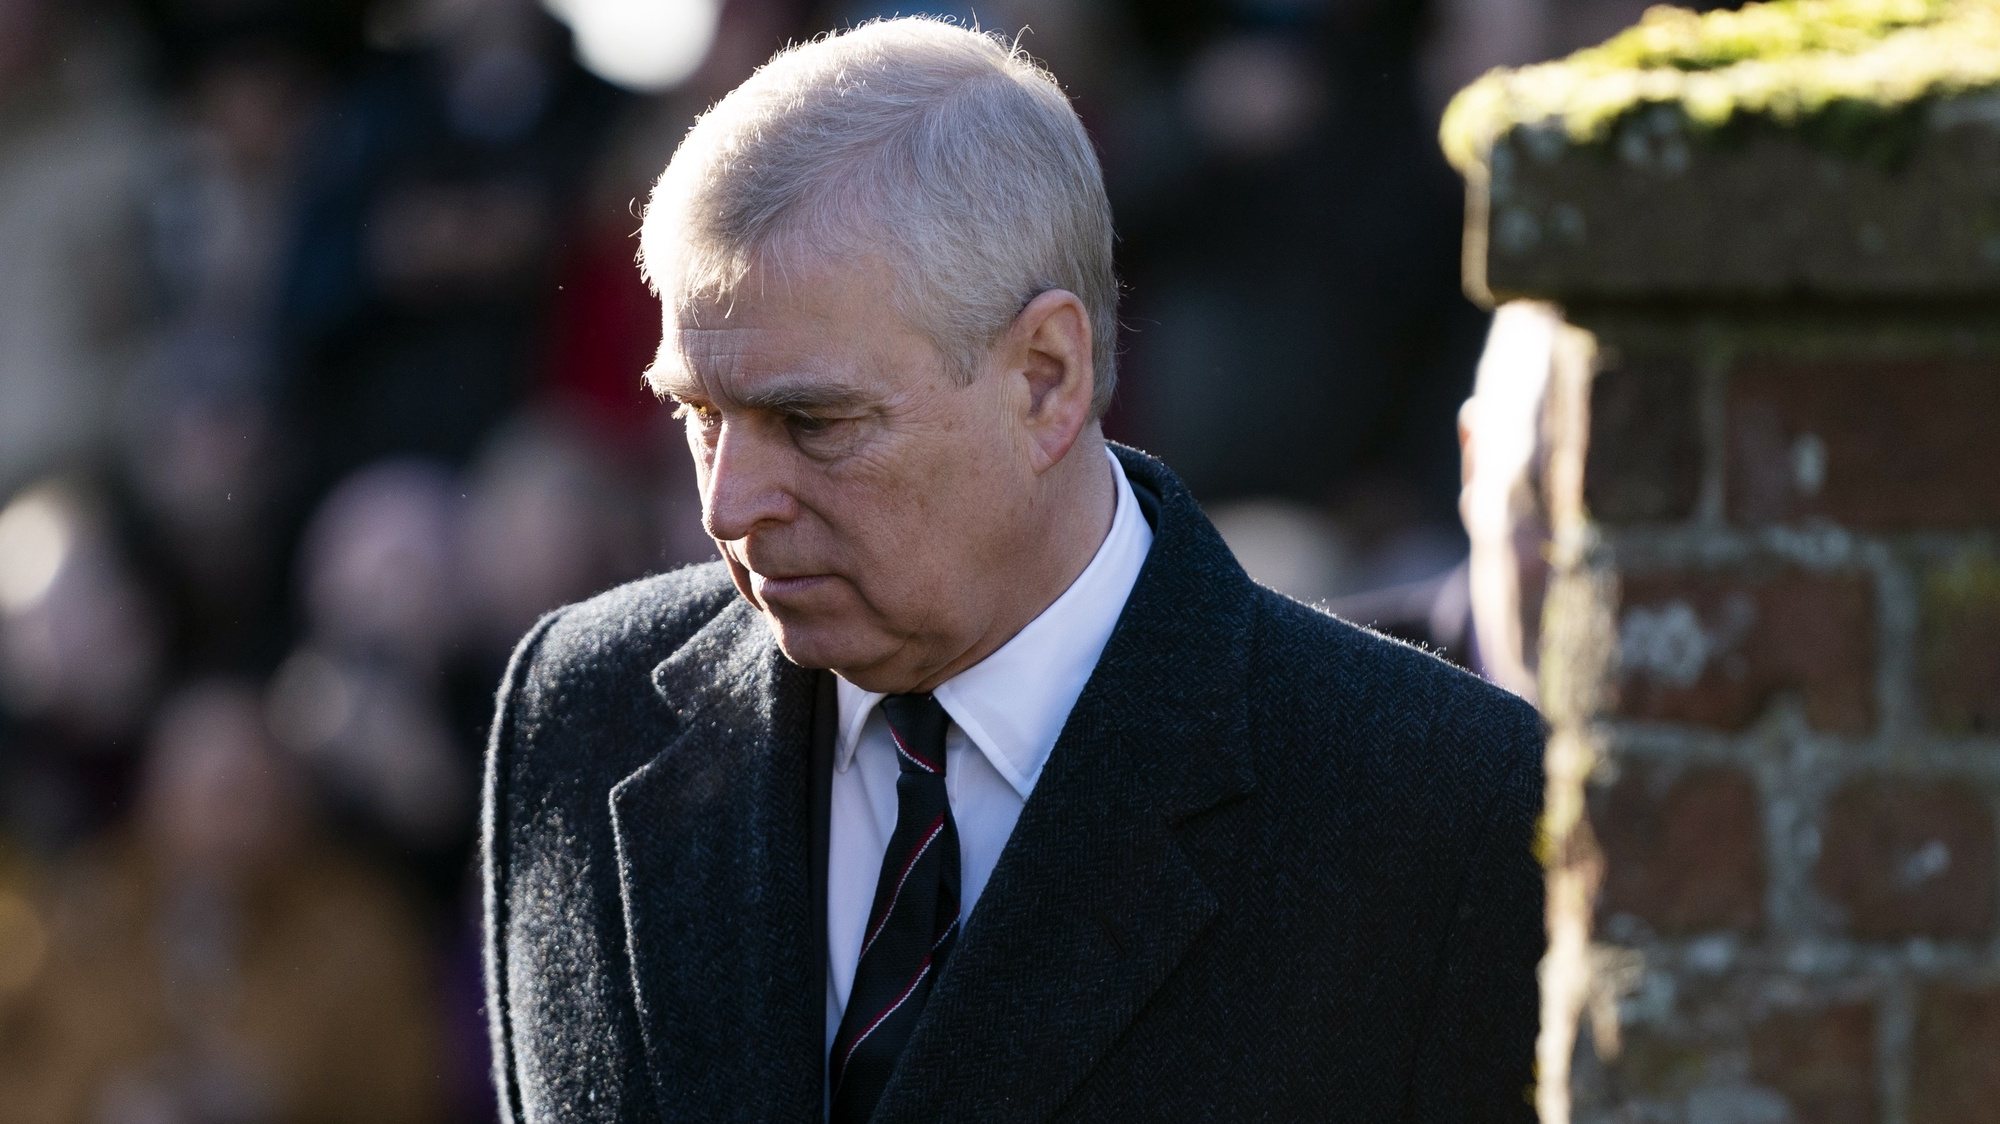 epa09479860 (FILE) - Britain&#039;s Prince Andrew, Duke of York arrives for a church service with Queen Elizabeth II (unseen) at St Mary the Virgin in Hillington, Norfolk, Britain, 19 January 2020 (reissued 21 September 2021). Prince Andrew on 20 September 2021 has been served with legal papers relating to a sexual assault lawsuit against him in the United States, US court documents show.  EPA/WILL OLIVER *** Local Caption *** 55780798